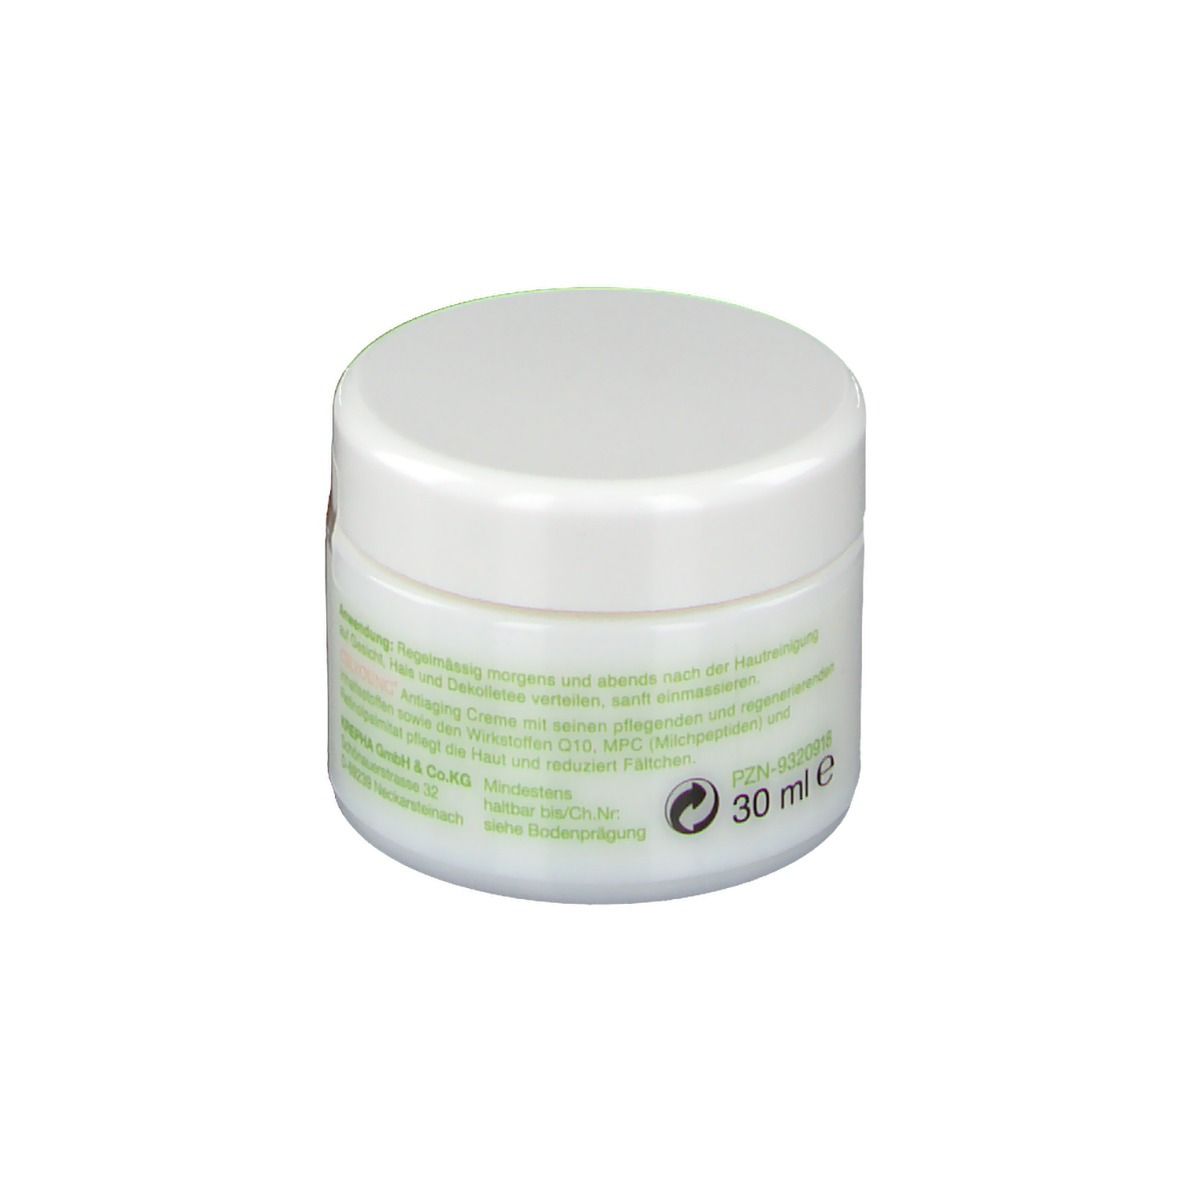 CELYOUNG® Antiaging Creme